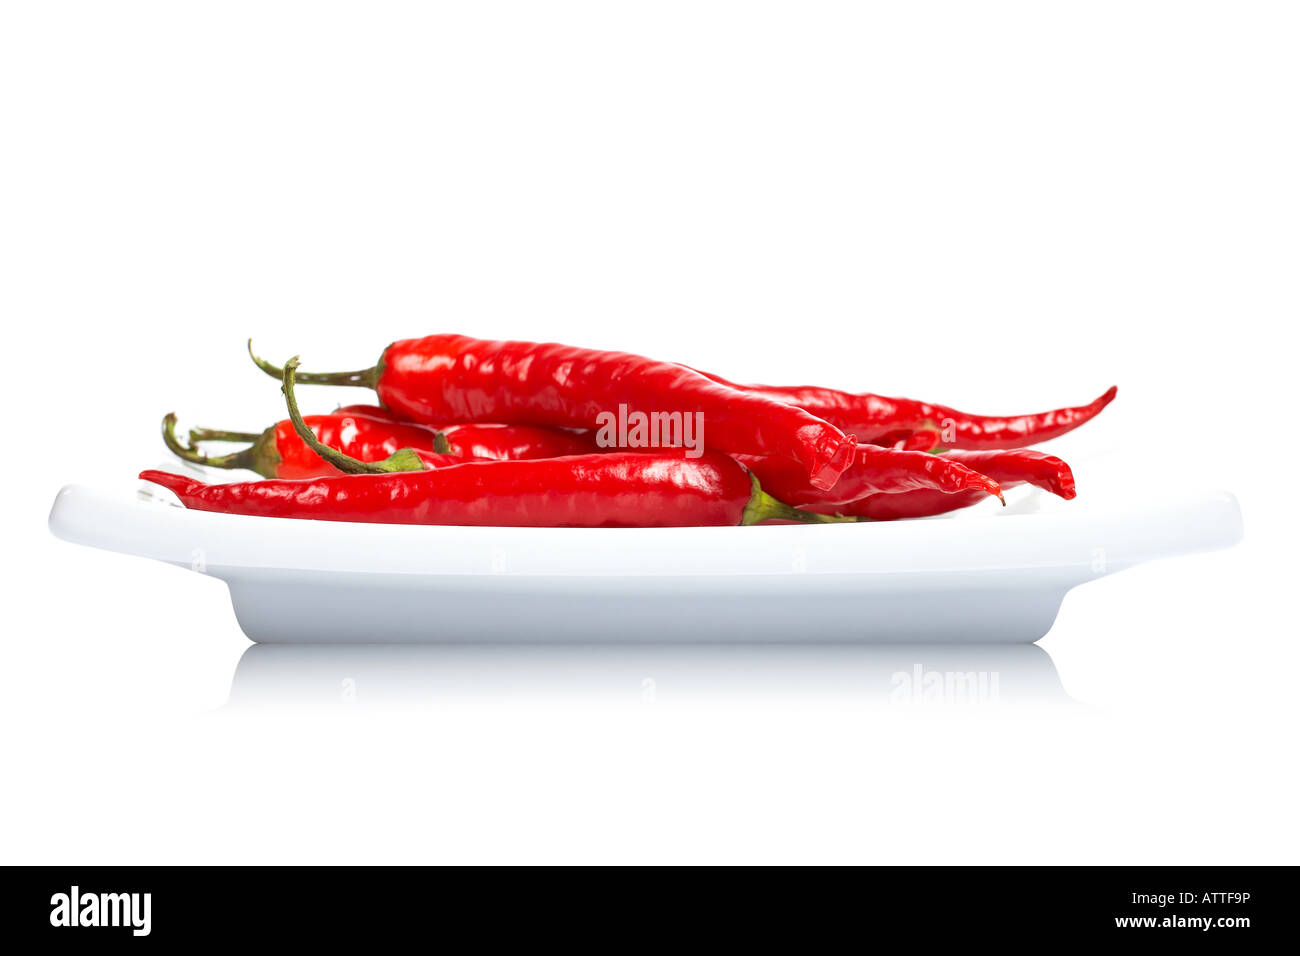 Red hot chili peppers in the dish reflected on white background with shallow DOF Stock Photo